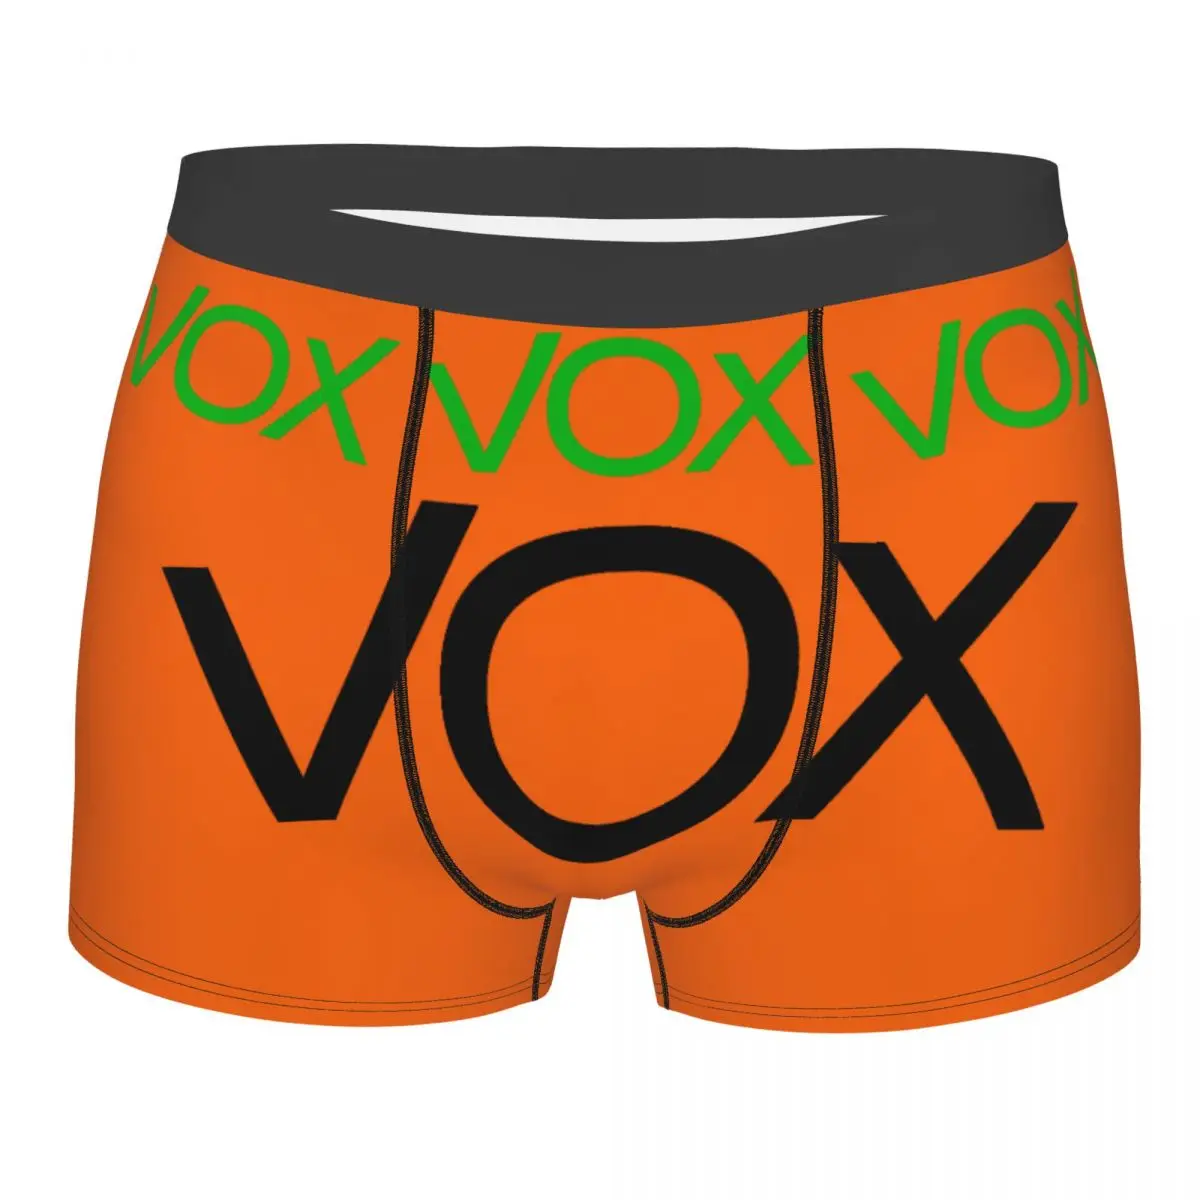 Espana Vox Logo Men Boxer Briefs Underpants Highly Breathable Top Quality Birthday Gifts